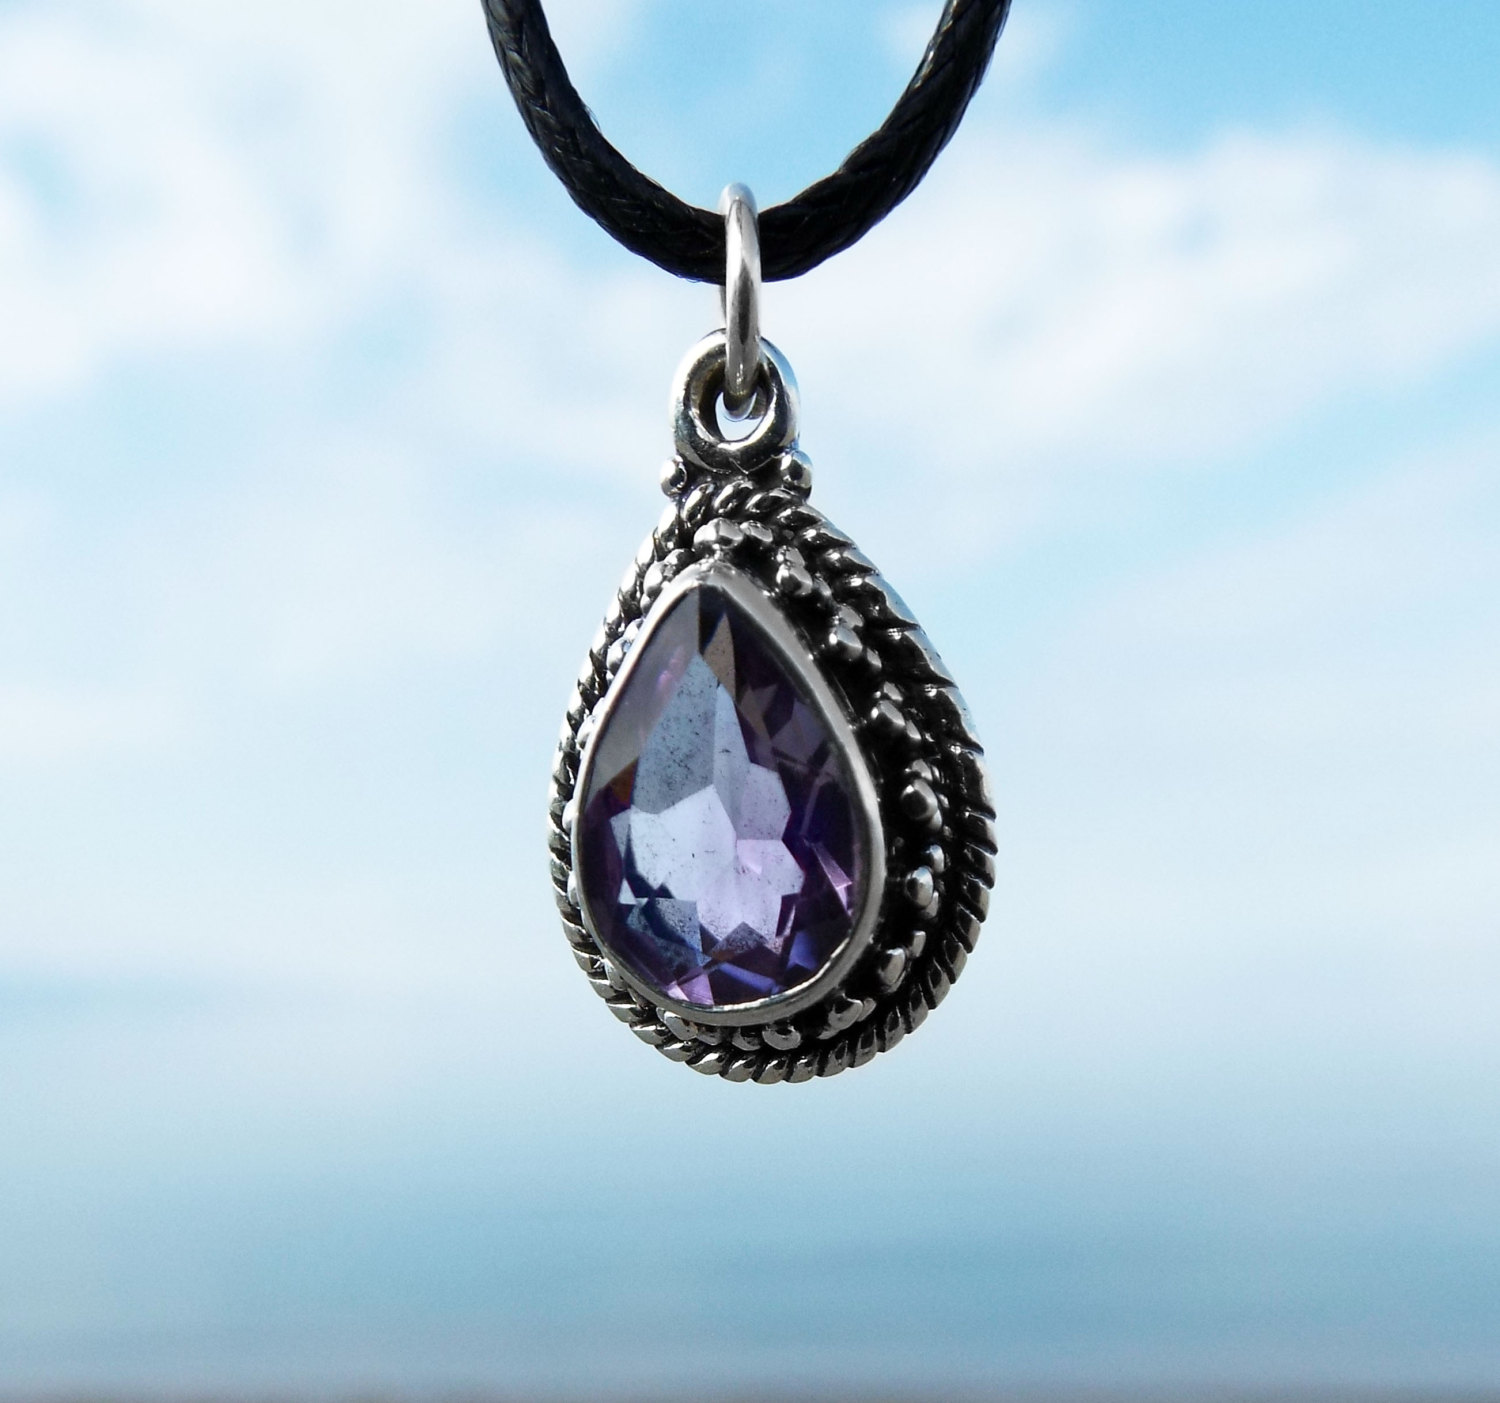 Amethyst Pendant Gemstone Silver Necklace Handmade Protection Sterling